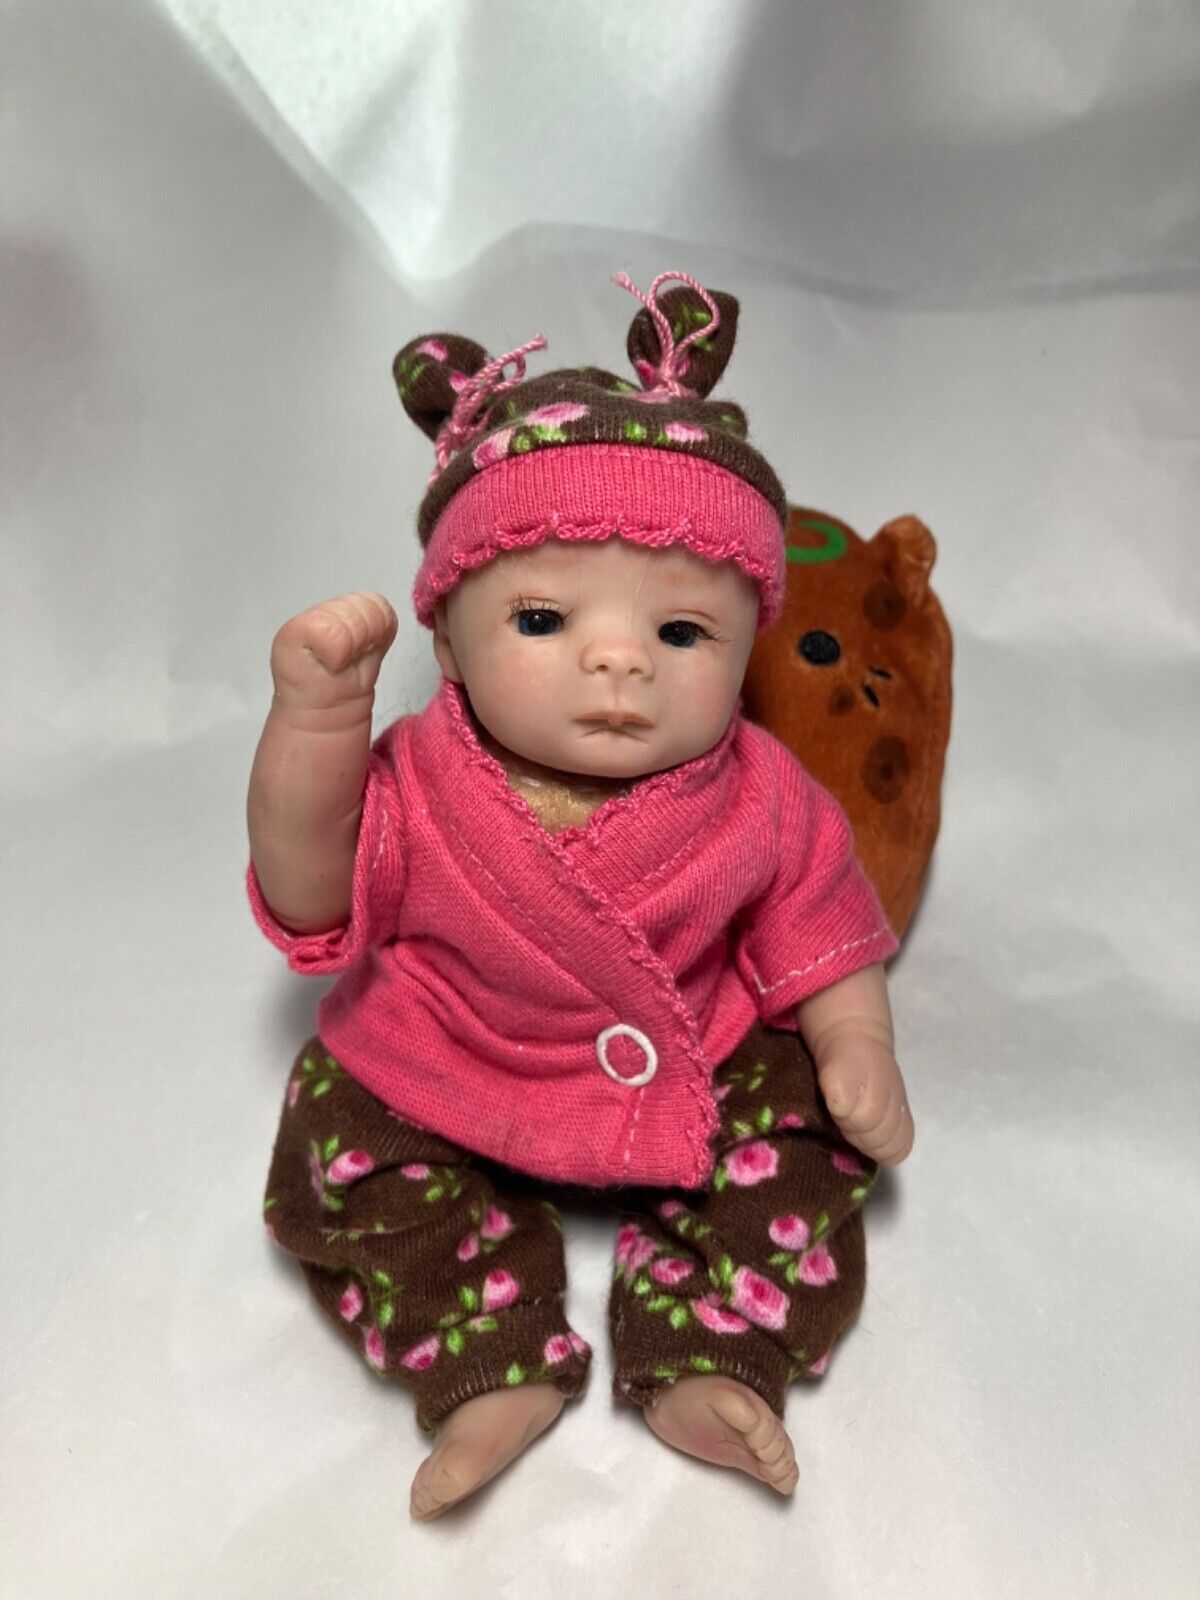 OOAK Polymer Clay Baby by Cecilia Gama 5.5 inches